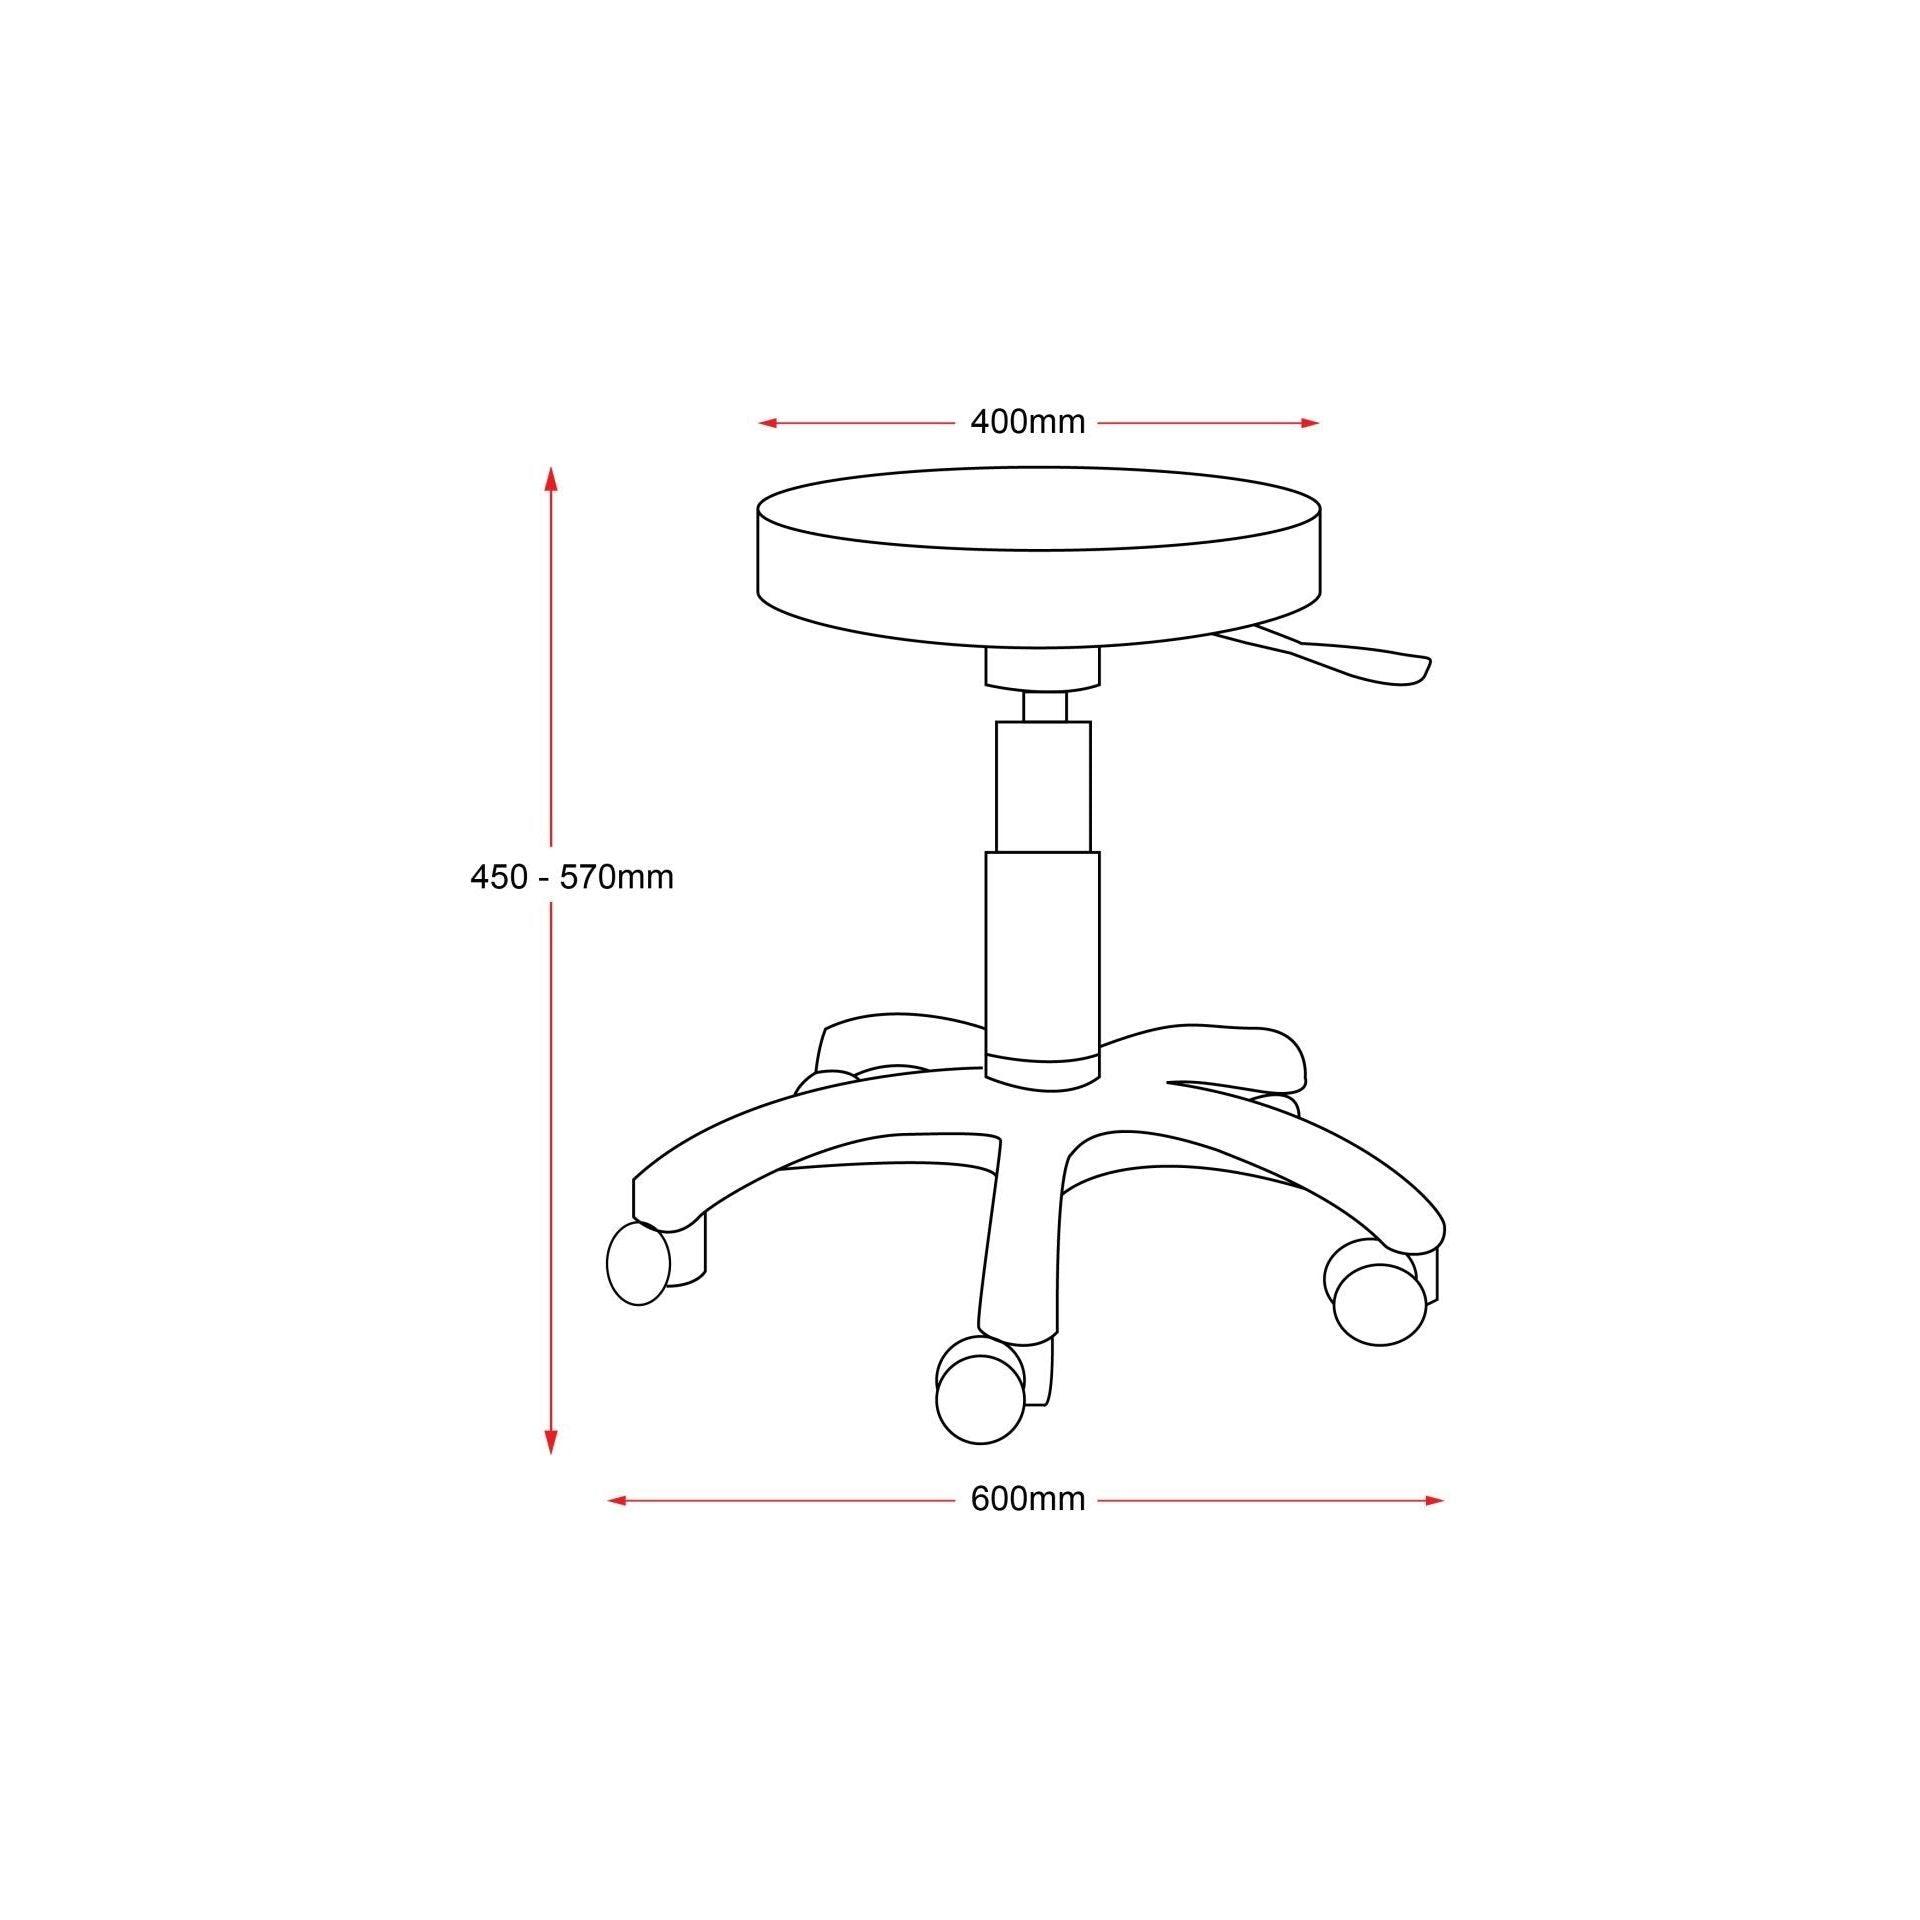 DS Desk Height Stool - Office Furniture Company 